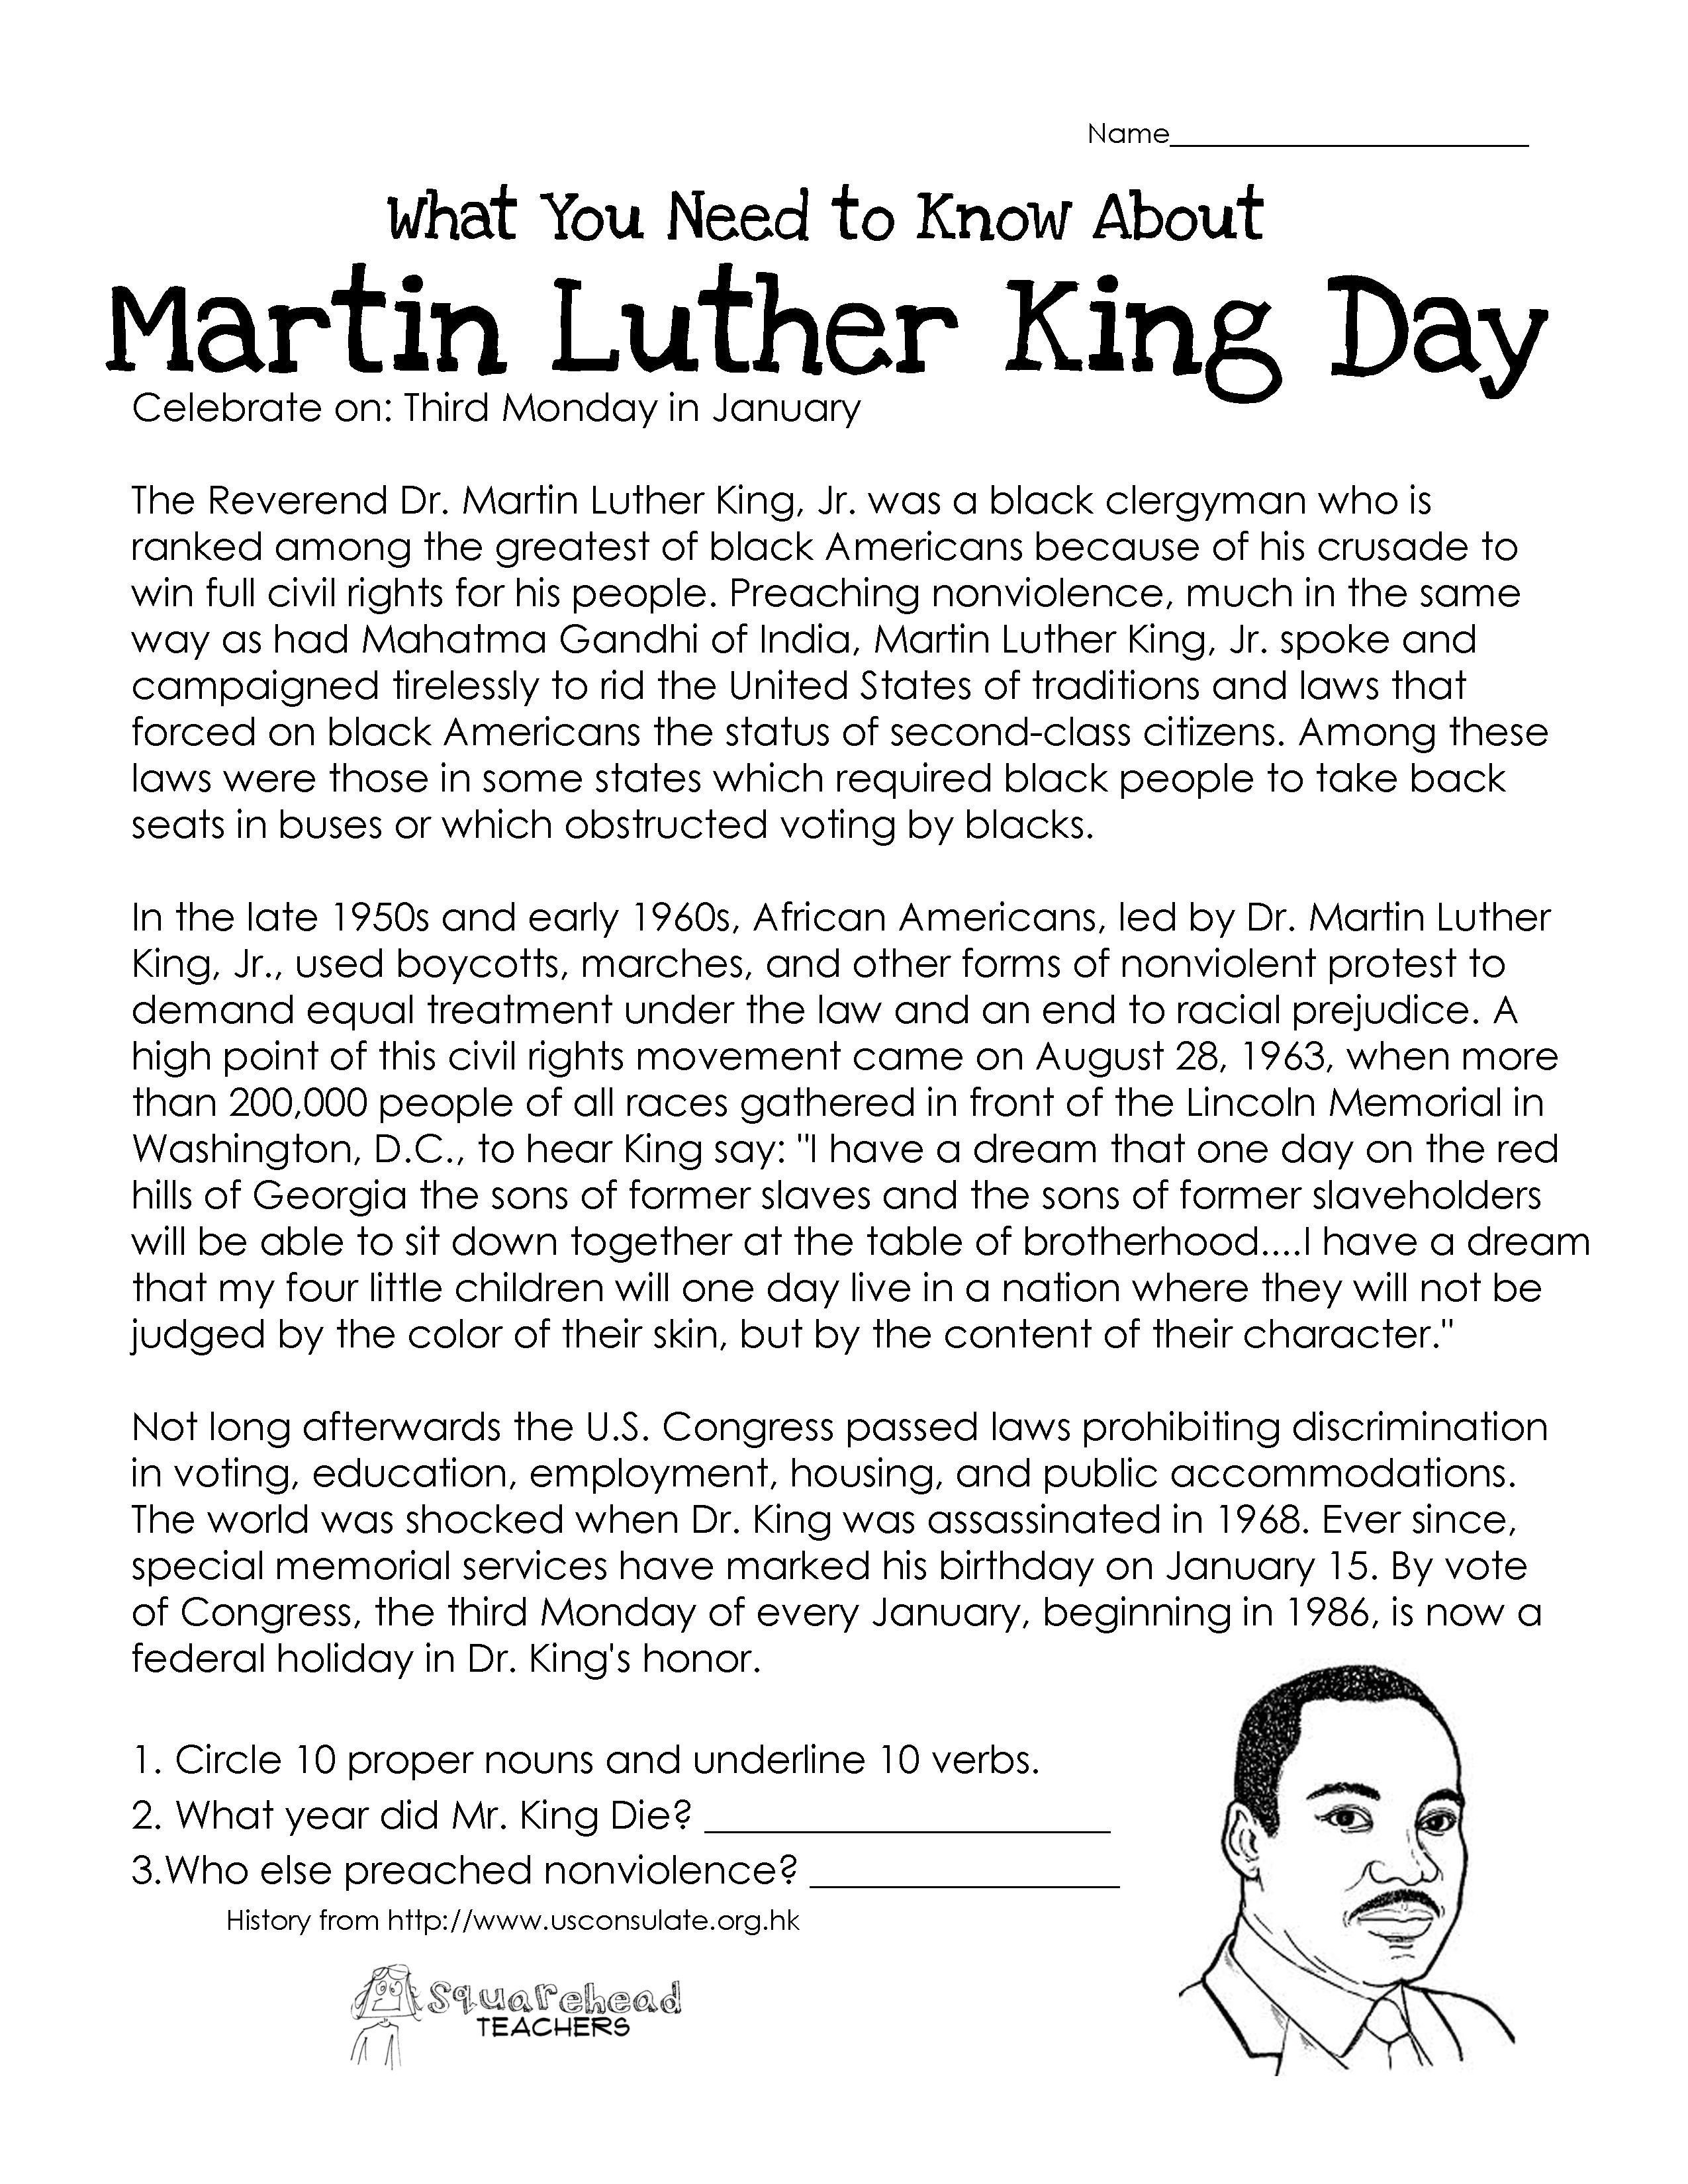 This Free Worksheet About Martin Luther King Day Covers The Basic - Free Printable Martin Luther King Jr Worksheets